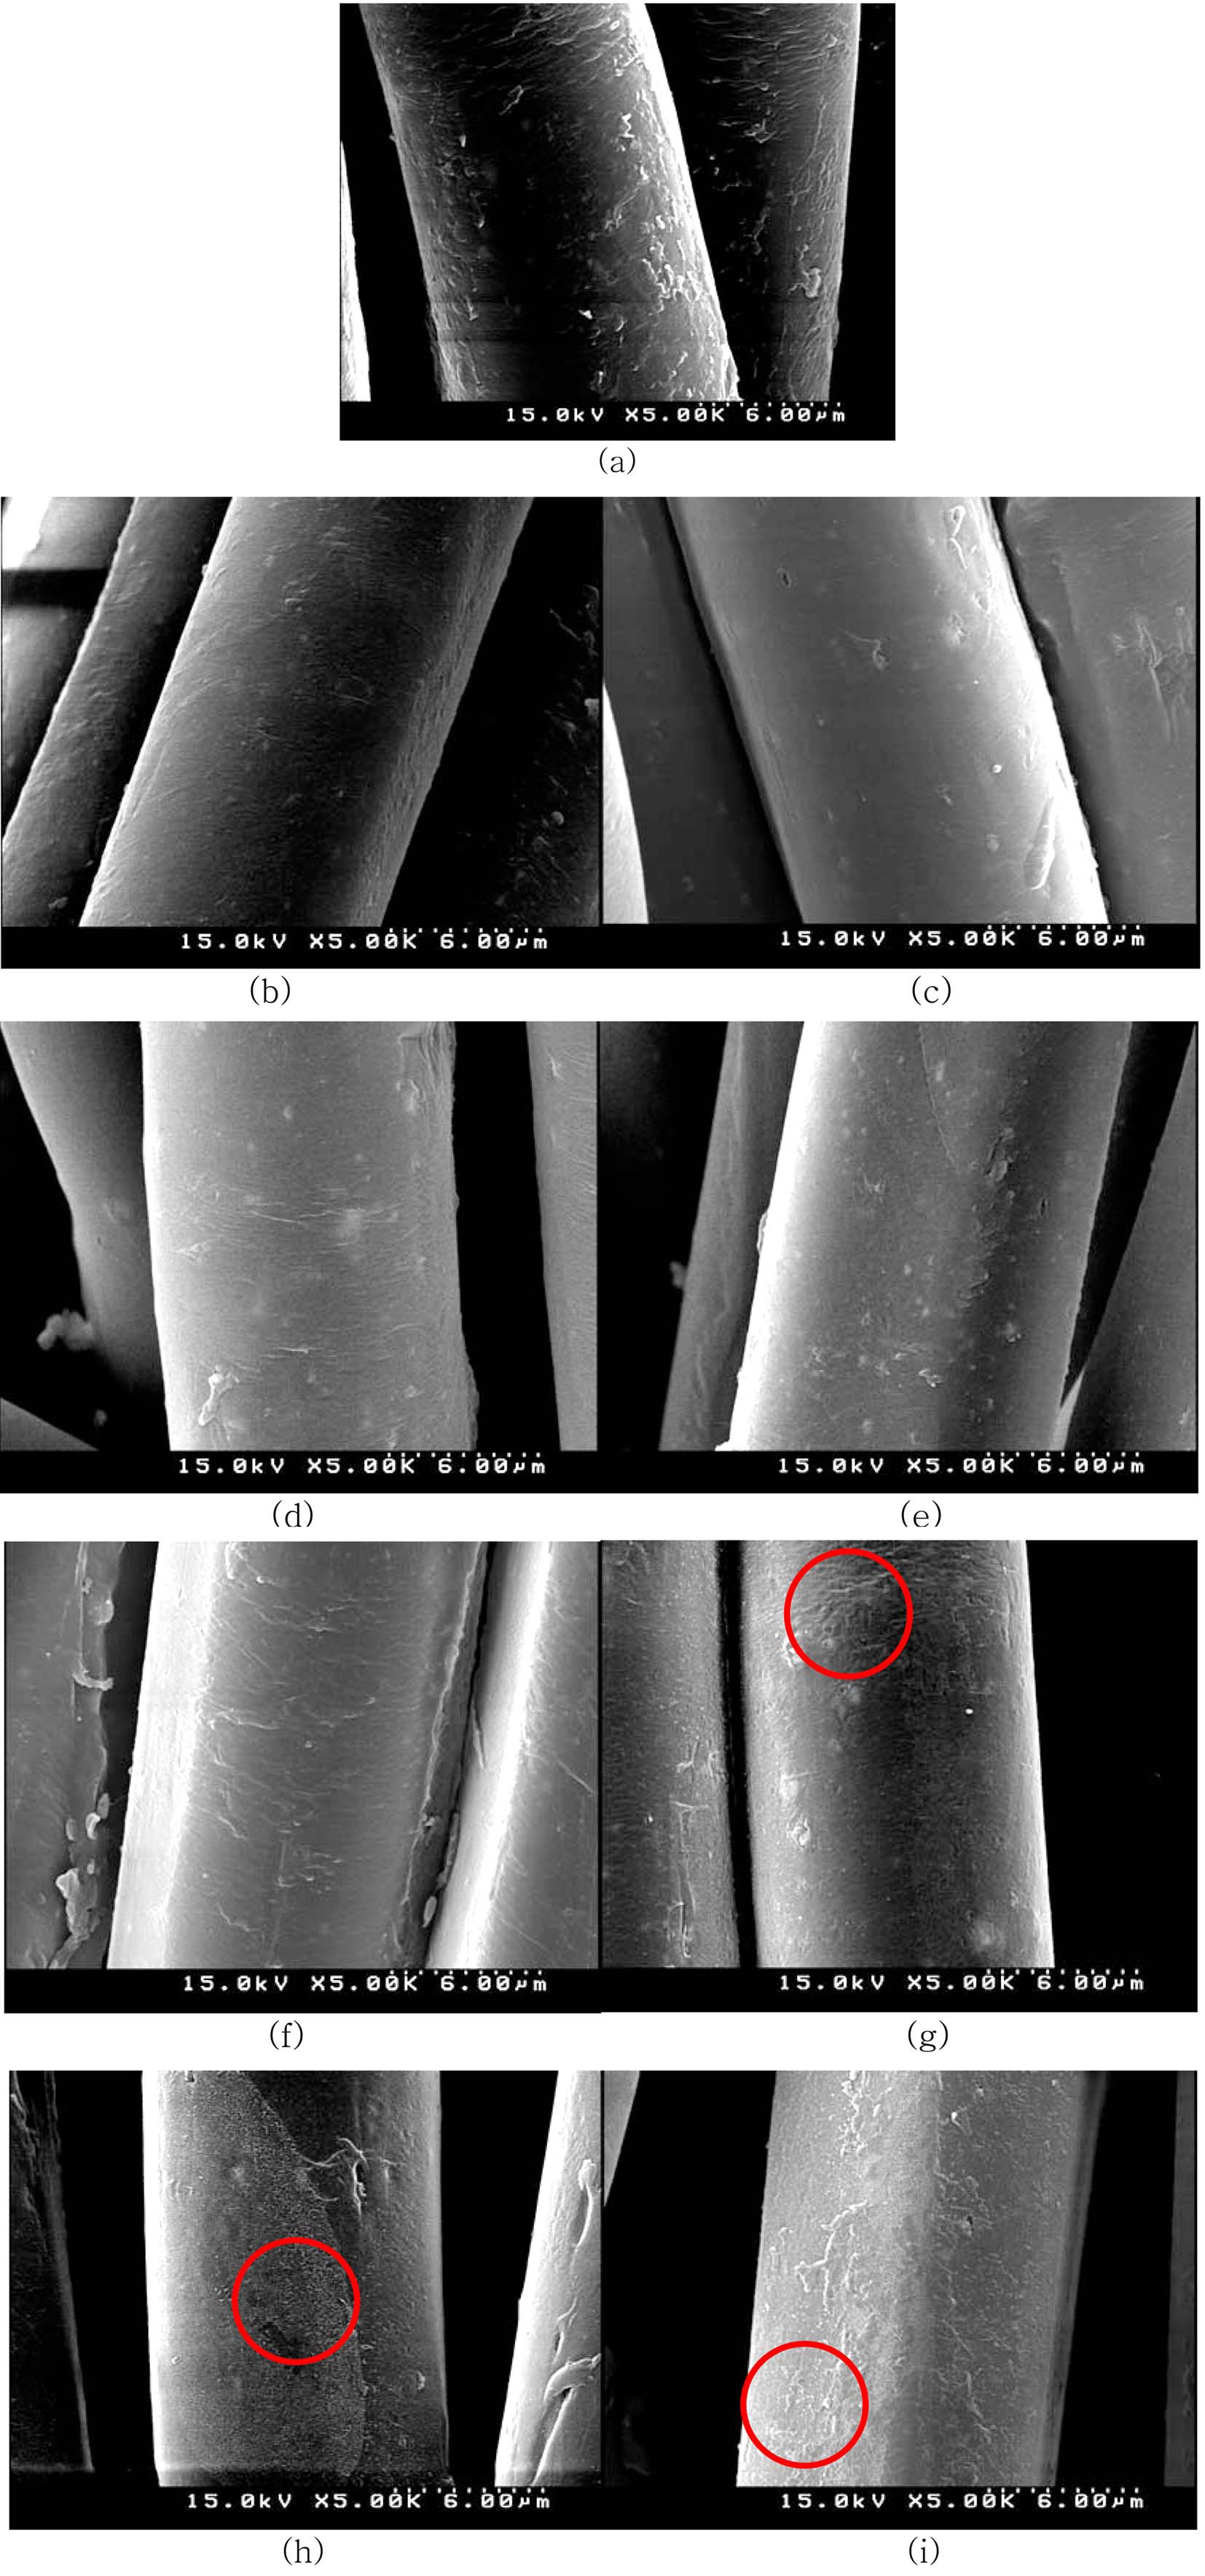 SEM photographs of nylon/PU water repellent blended fabric treated with low temperature plasma at the condition of 50, 100W power; (a) Untreated, (b) 50W 1min, (c) 50W 3min, (d) 50W 5min, (e) 50W 7min, (f) 100W 1min, (g) 100W 3min, (h) 100W 5min, (i) 100W 7min.